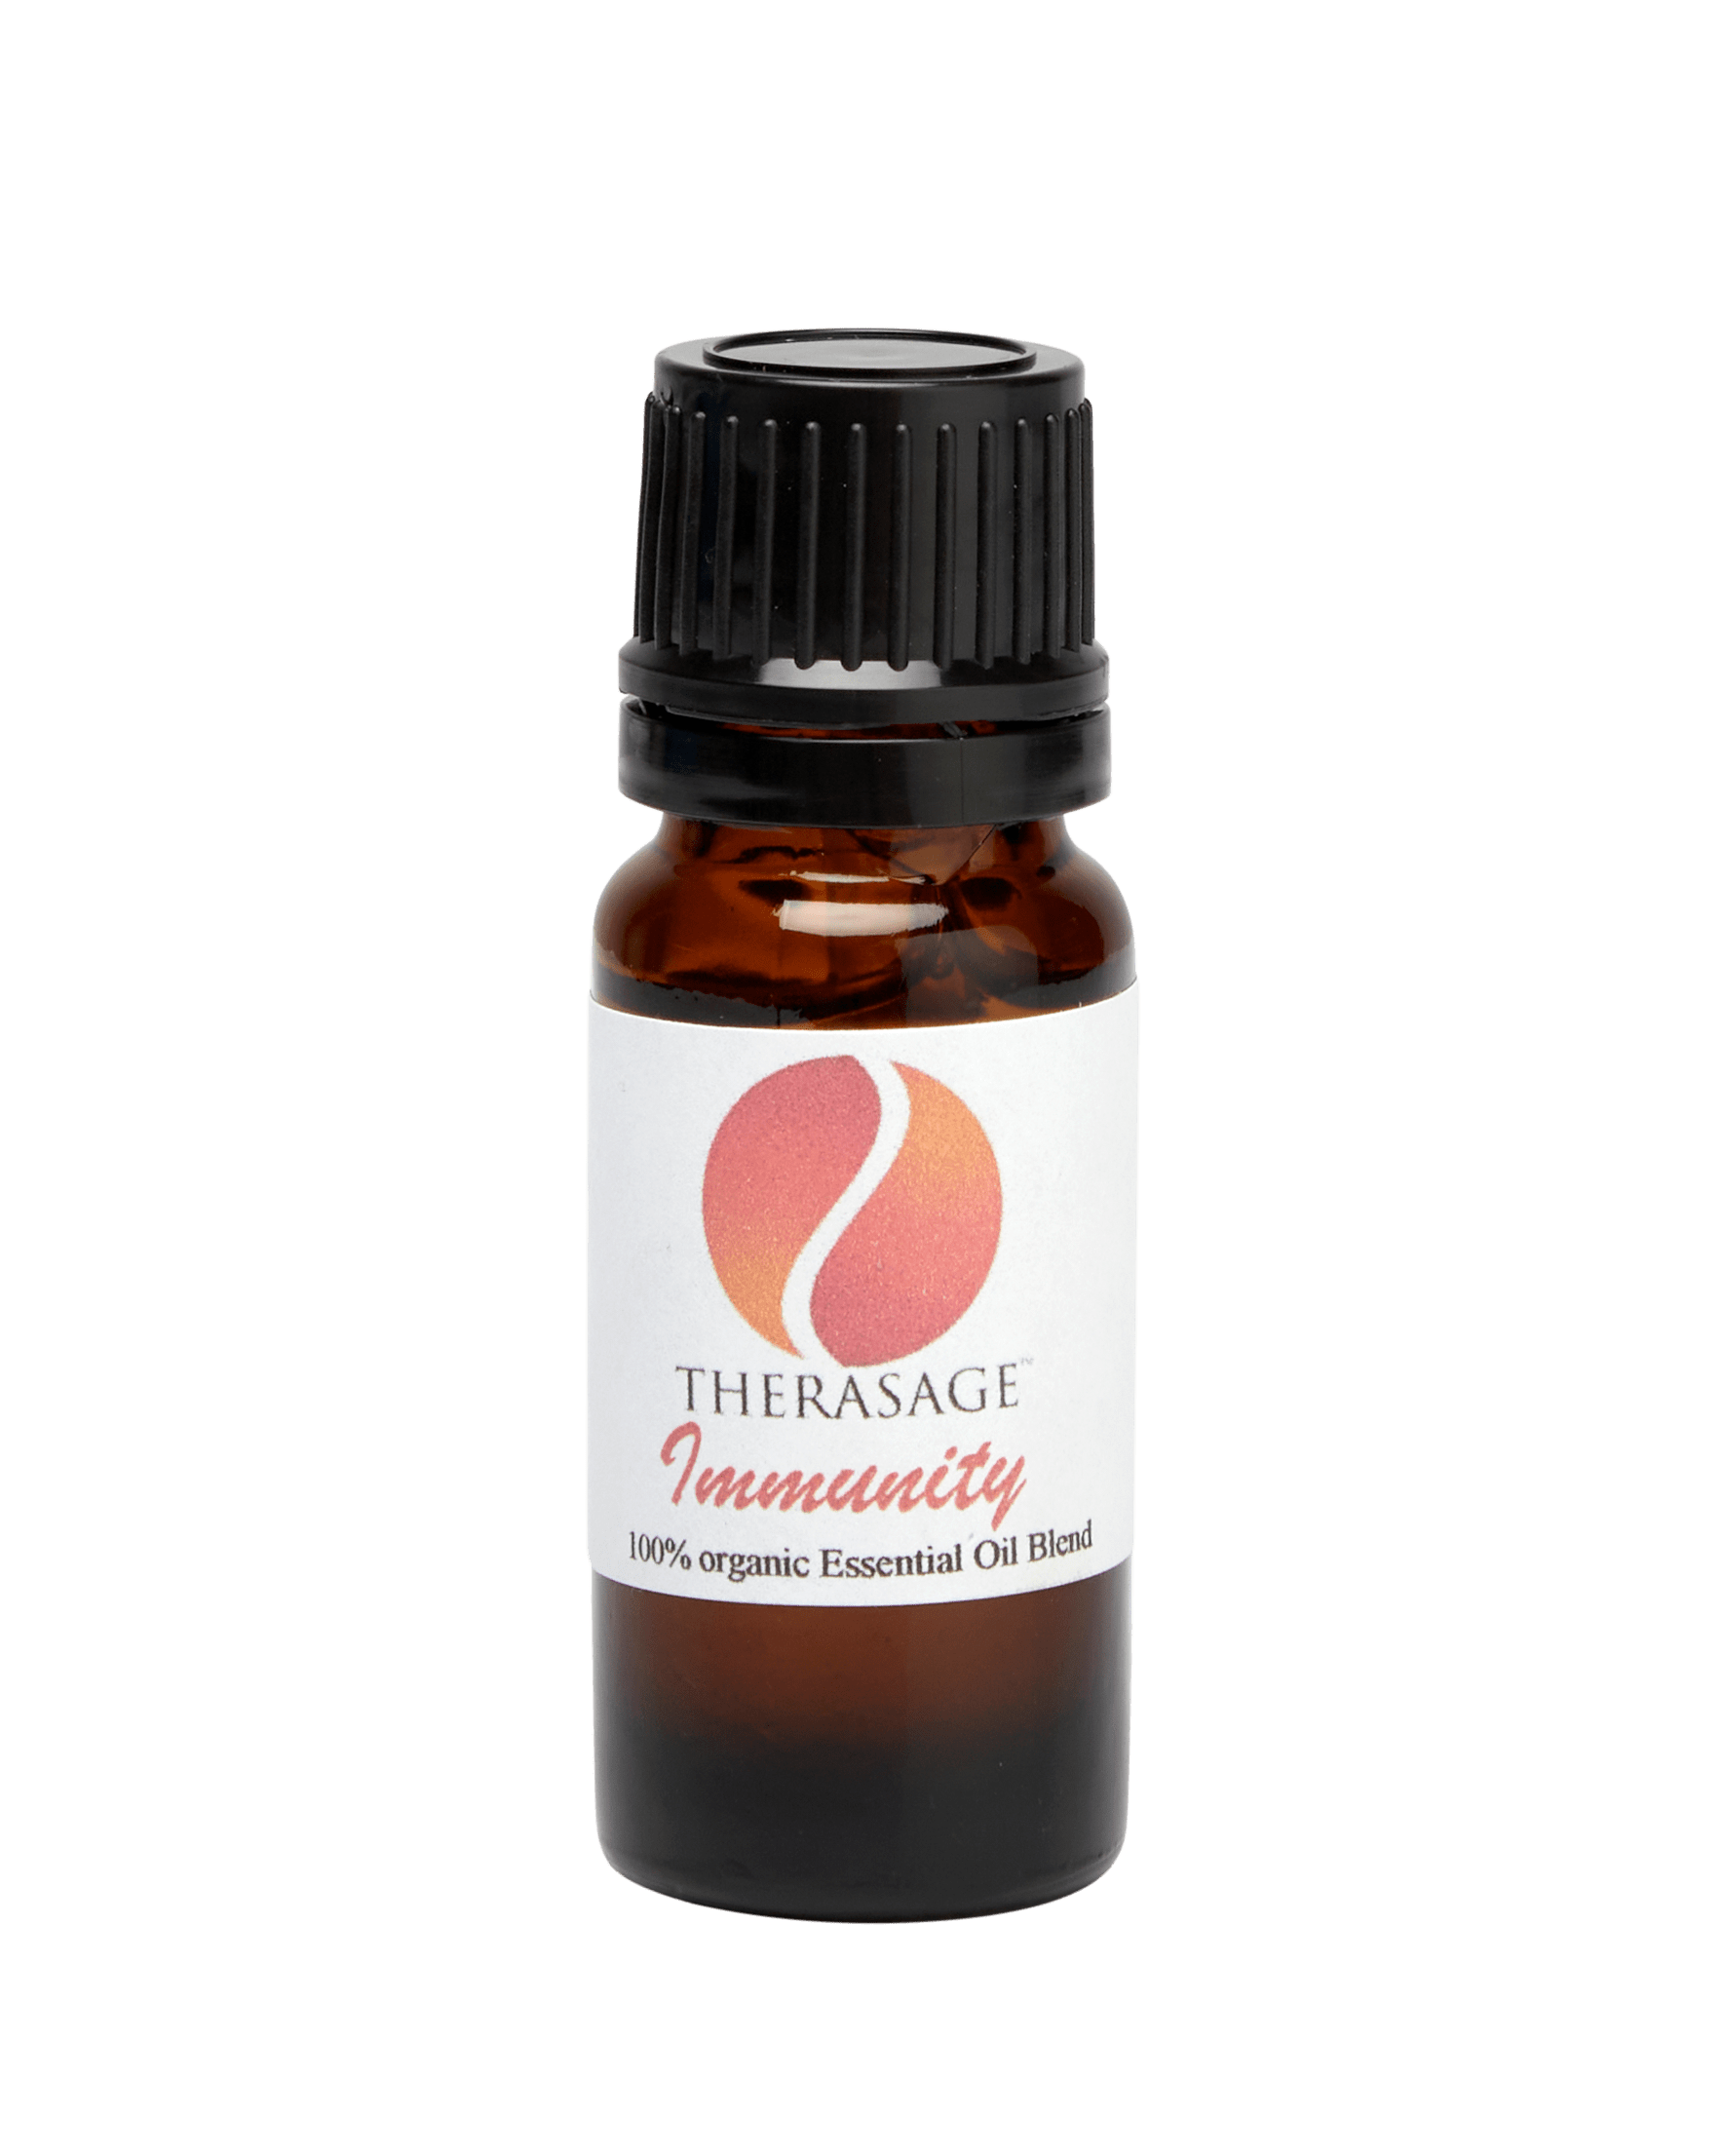 Therasage All Immunity Therasage TheraEssential Oil Blend